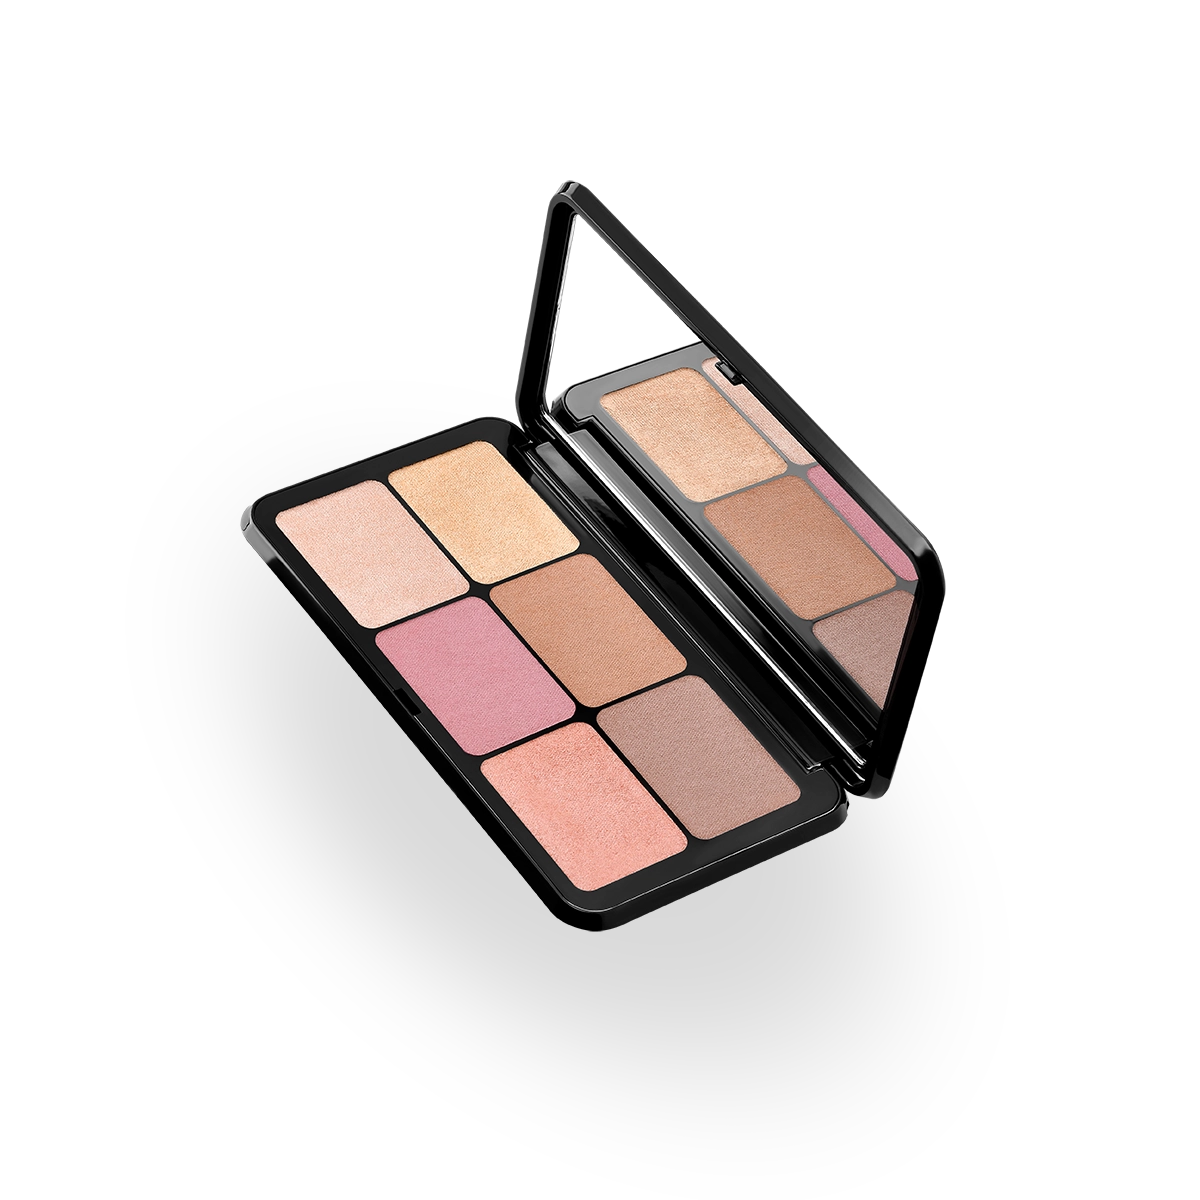 Irresistible Total Look Face Powder Palette